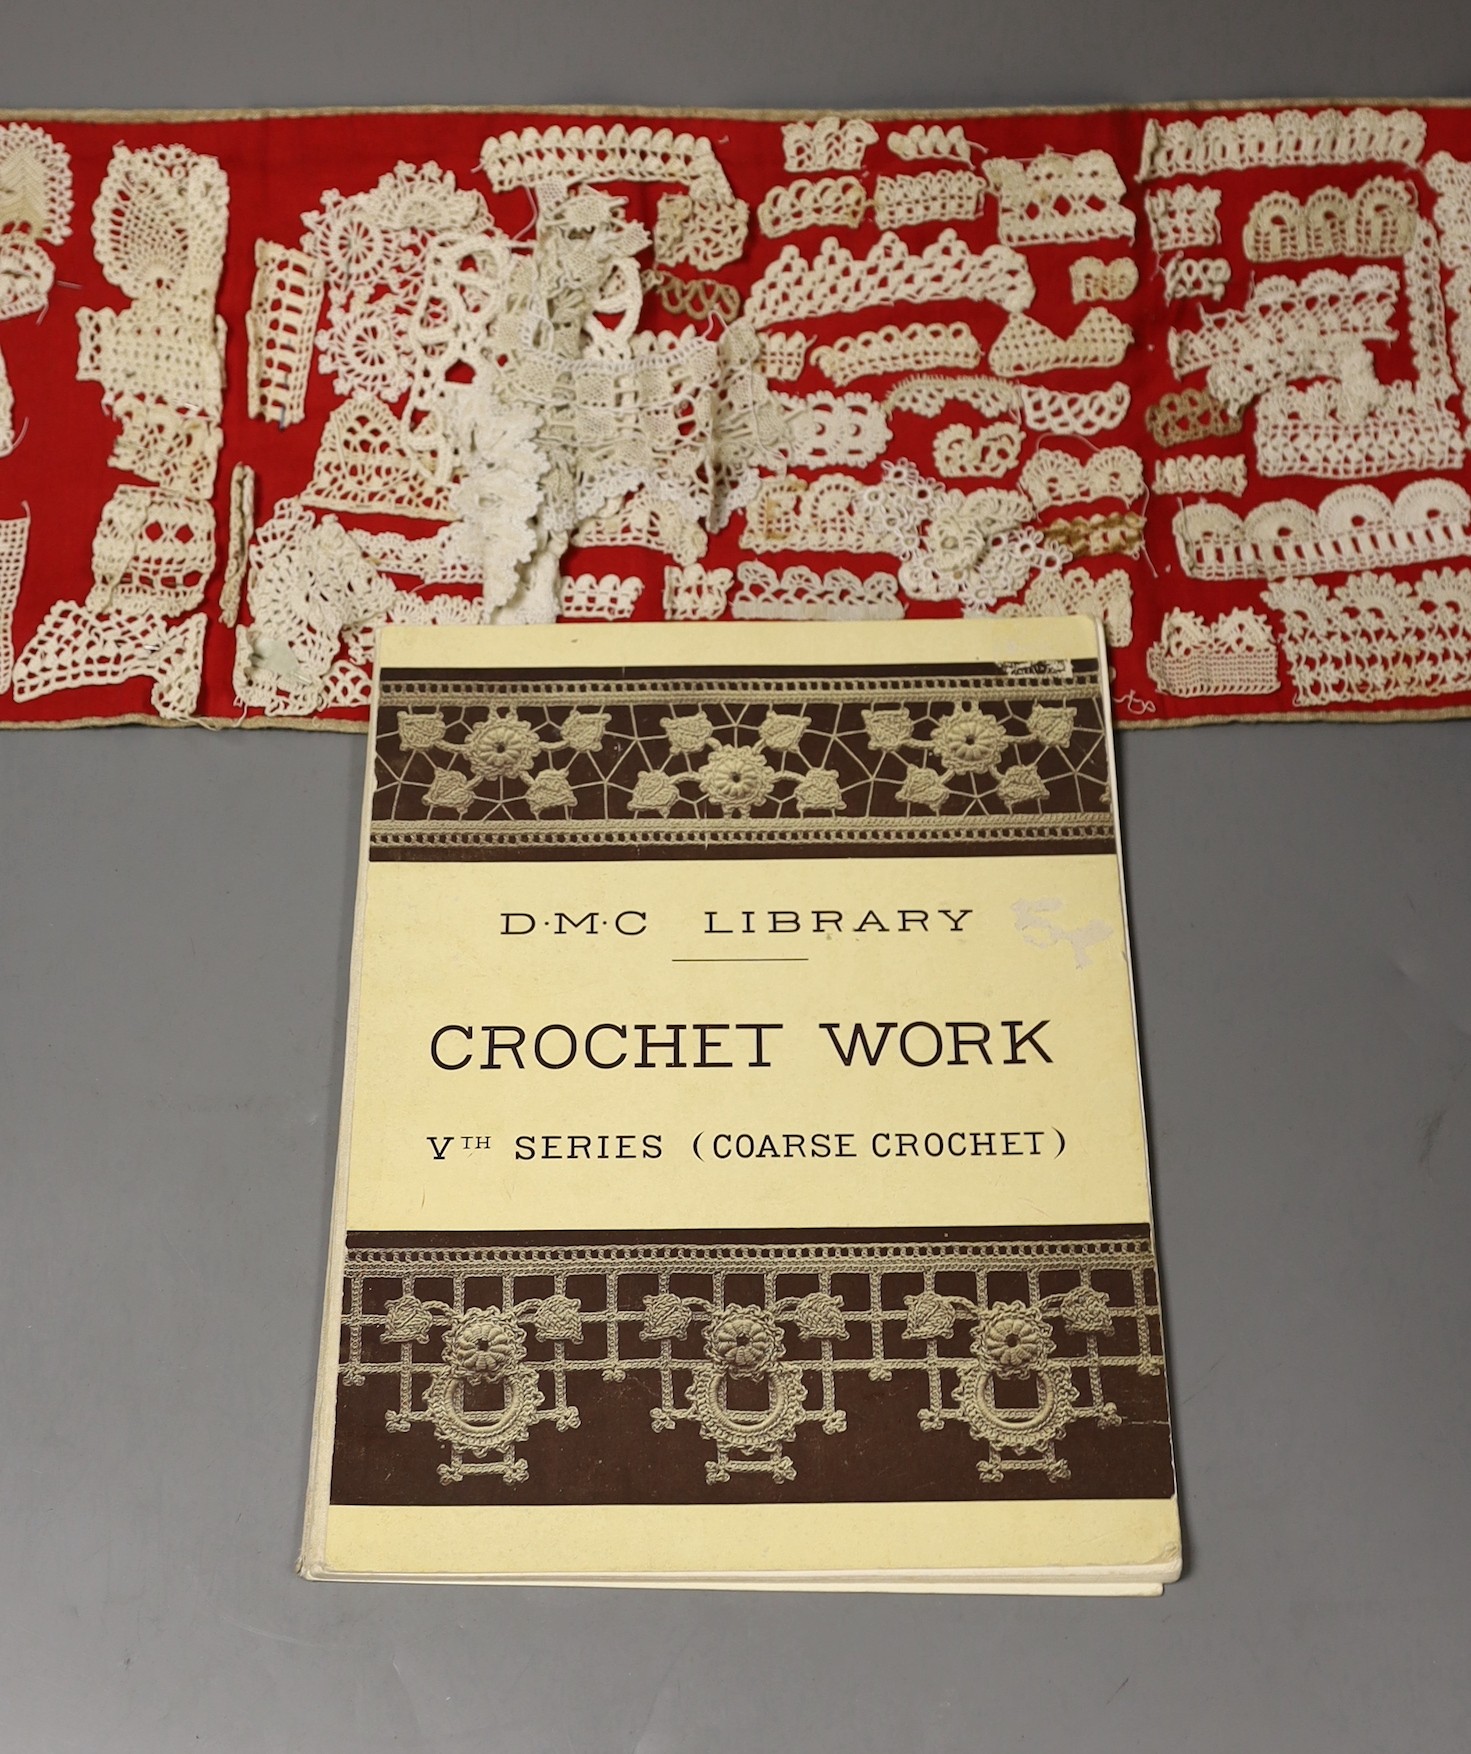 A collection of different crochet worked motifs and panels together with the DMC Library crochet work book